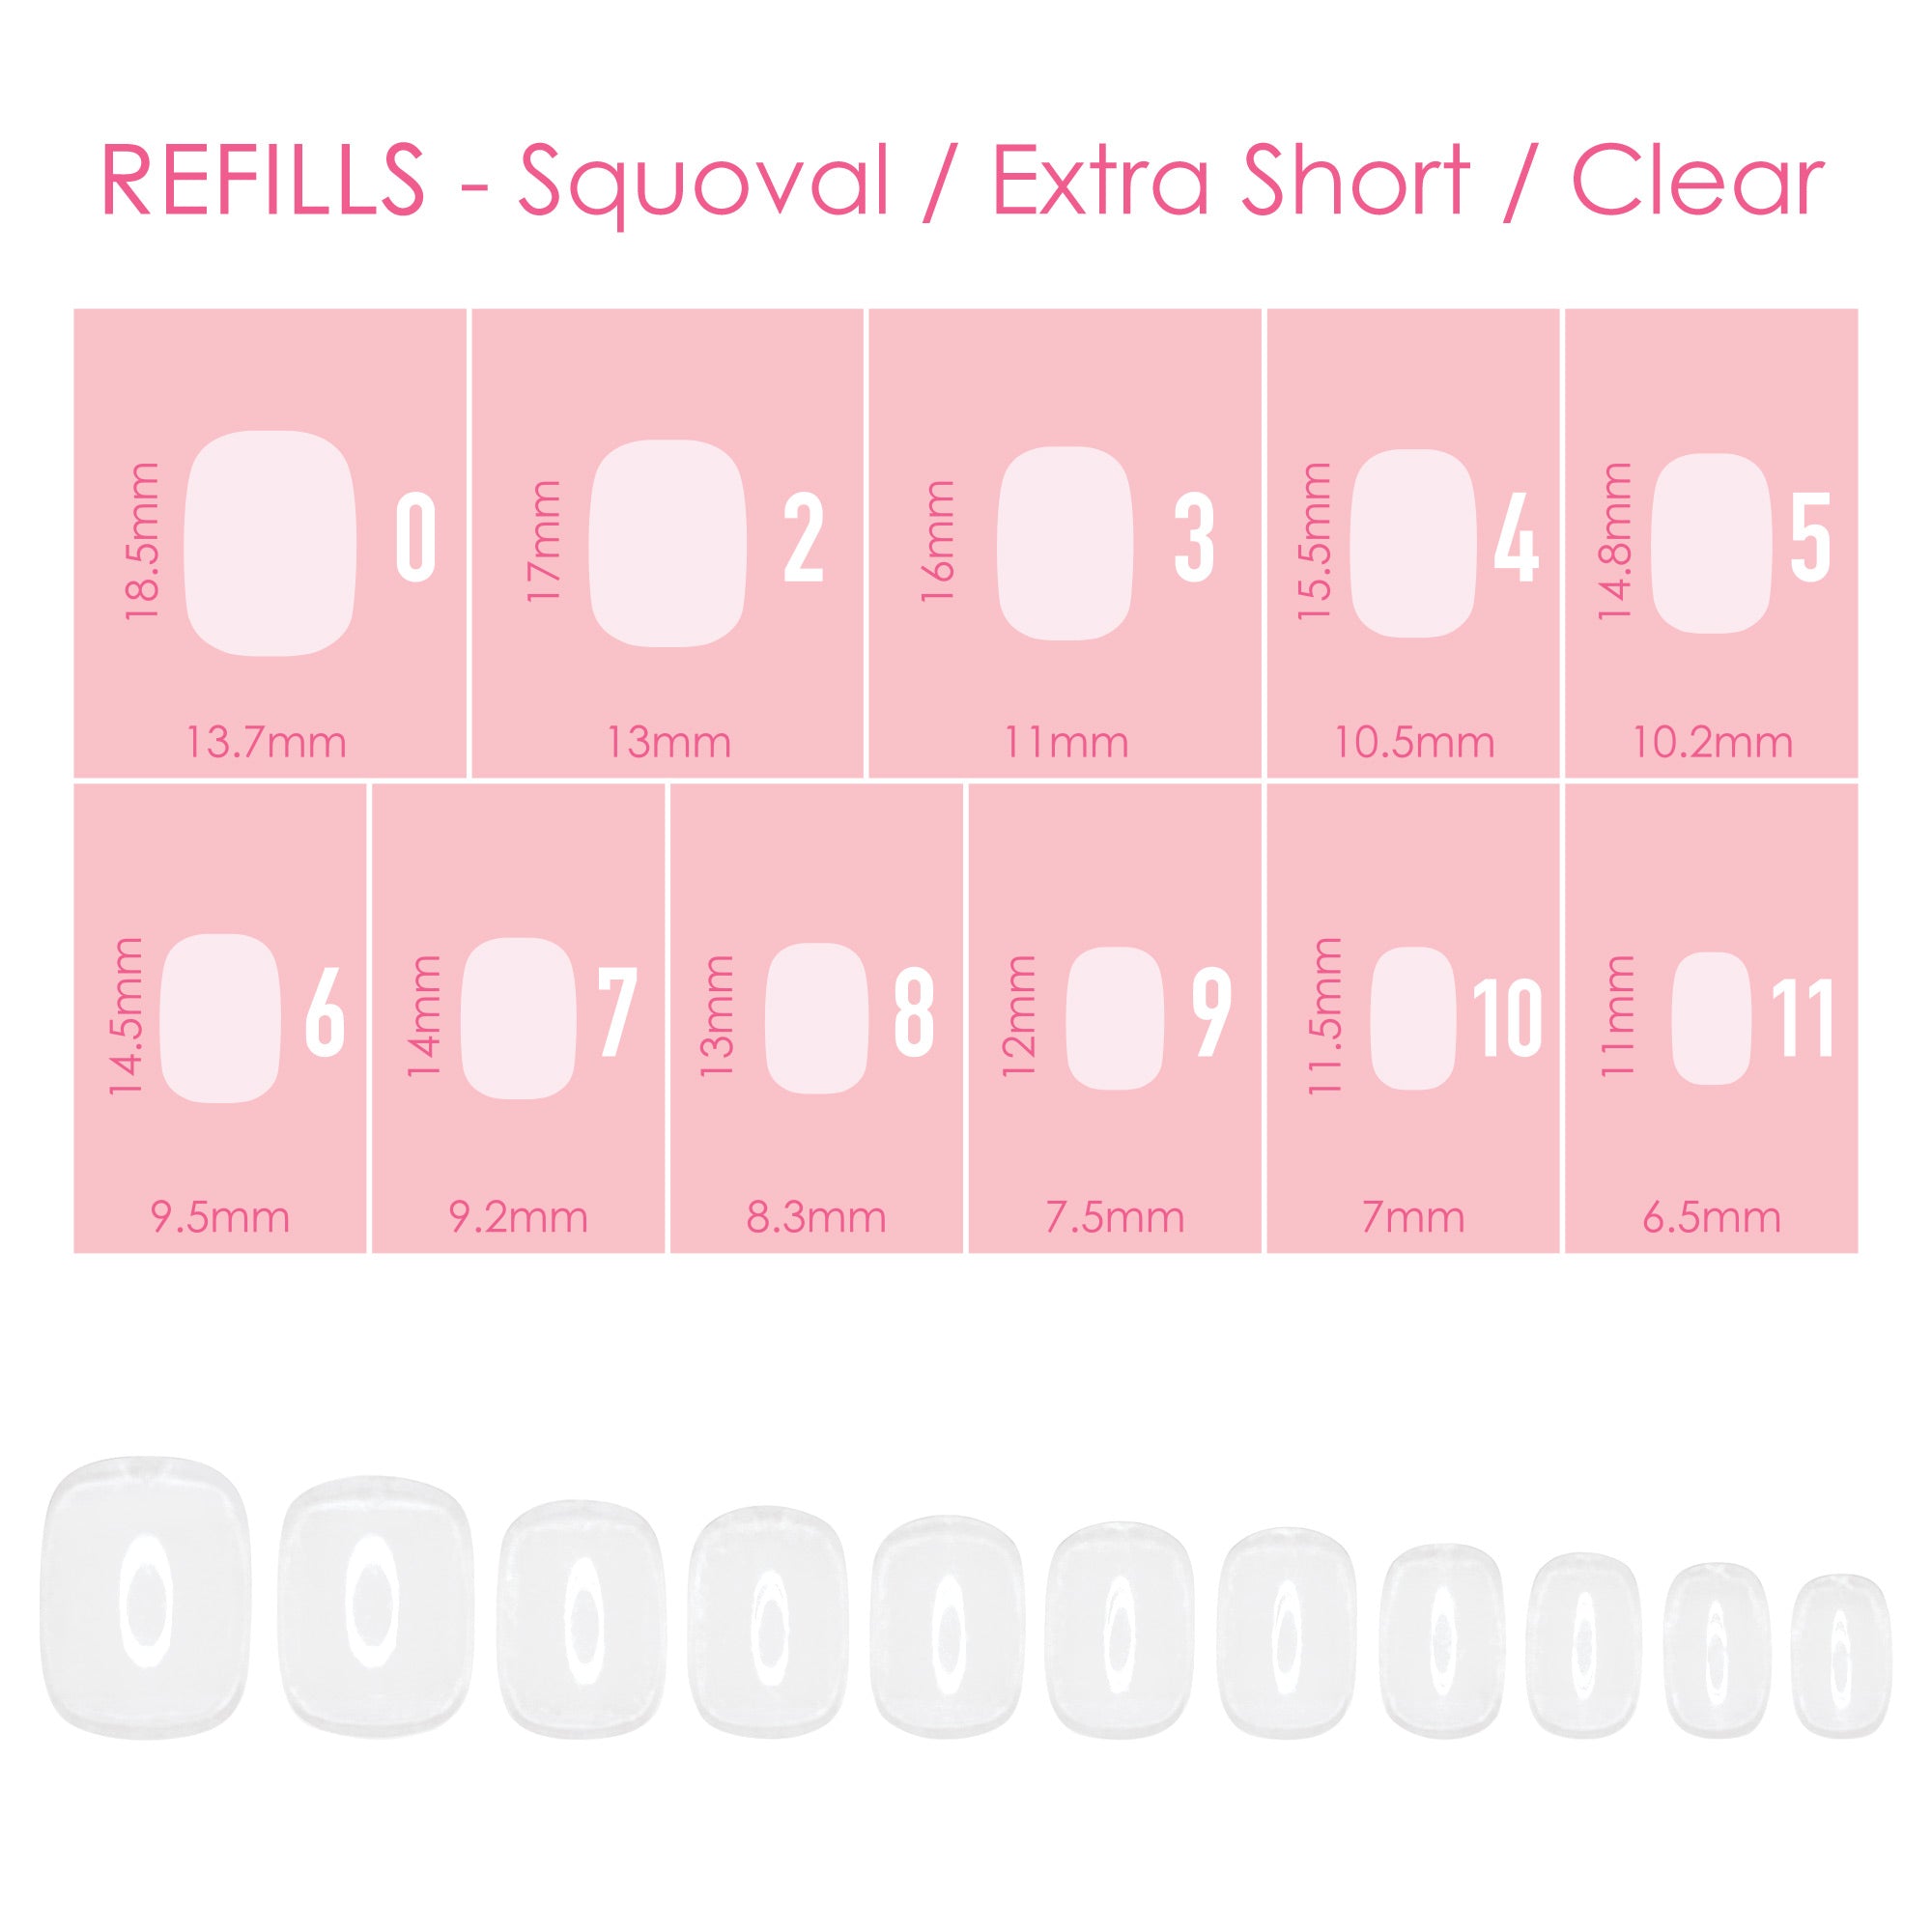 Charme Gel Extension Tips Refill / Squoval / Extra Short / Clear